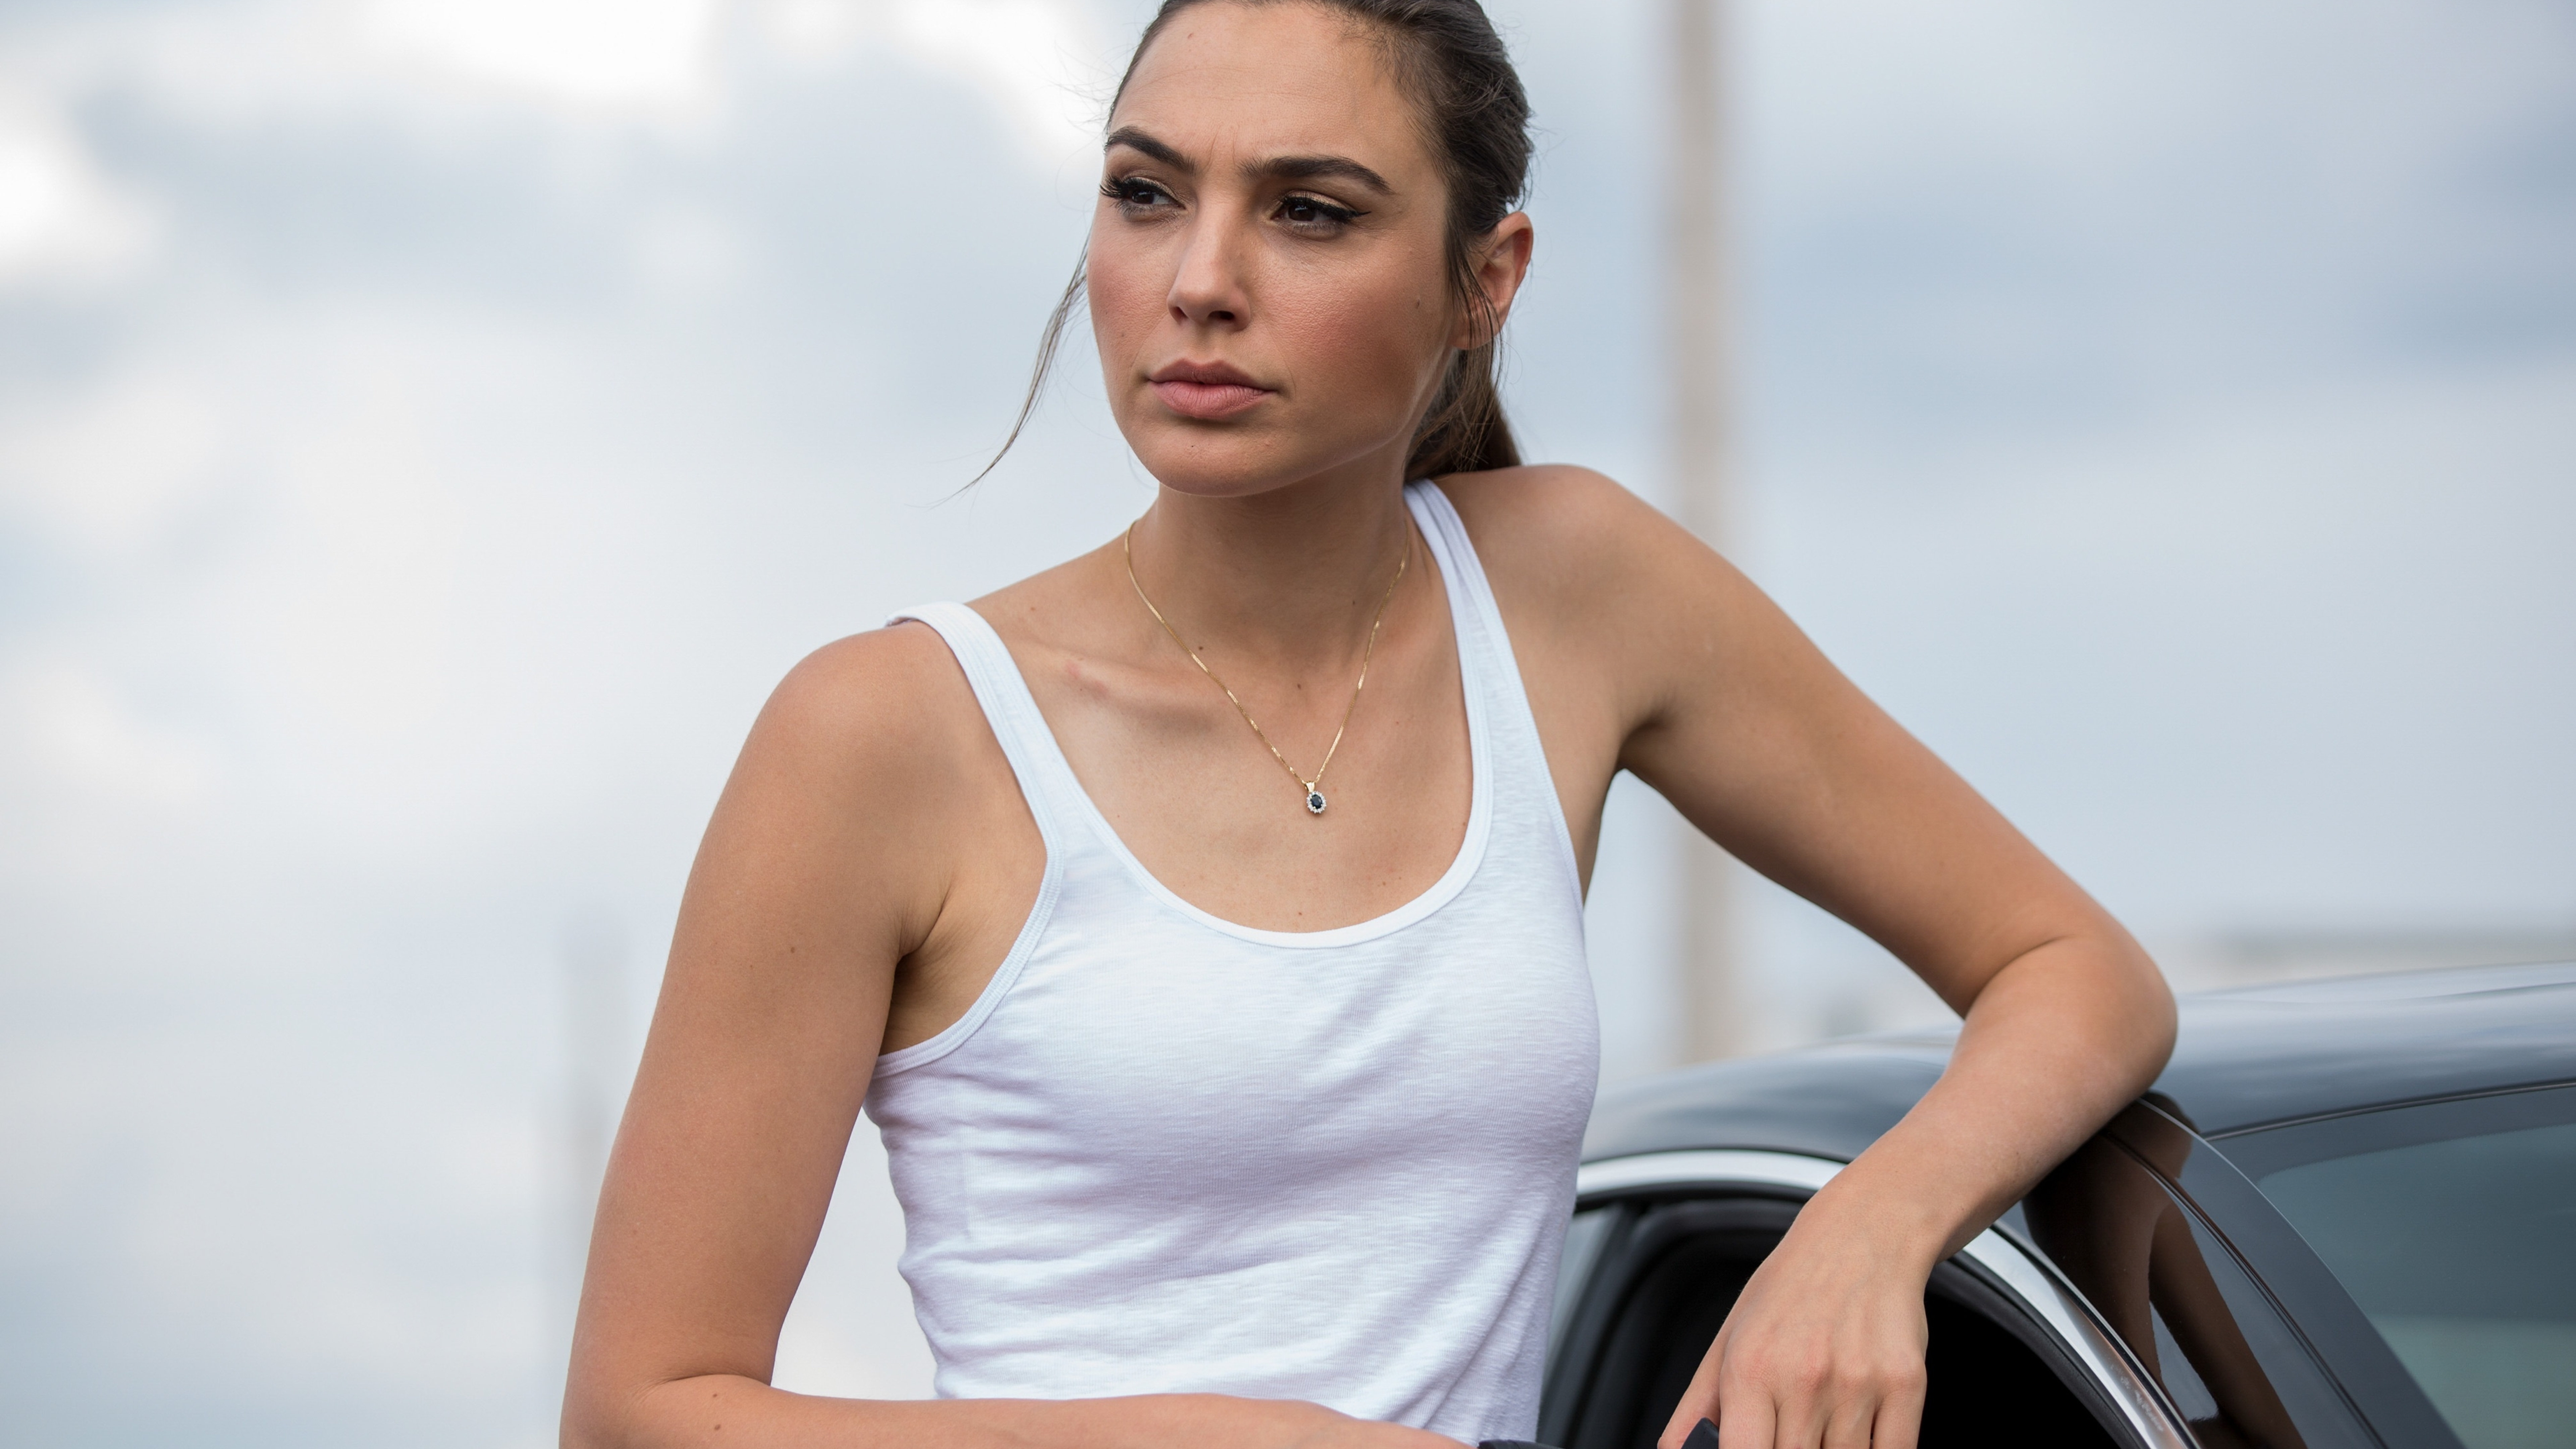 Gal Gadot In Keeping Up With The Joneses, HD 4K Wallpaper7679 x 4320